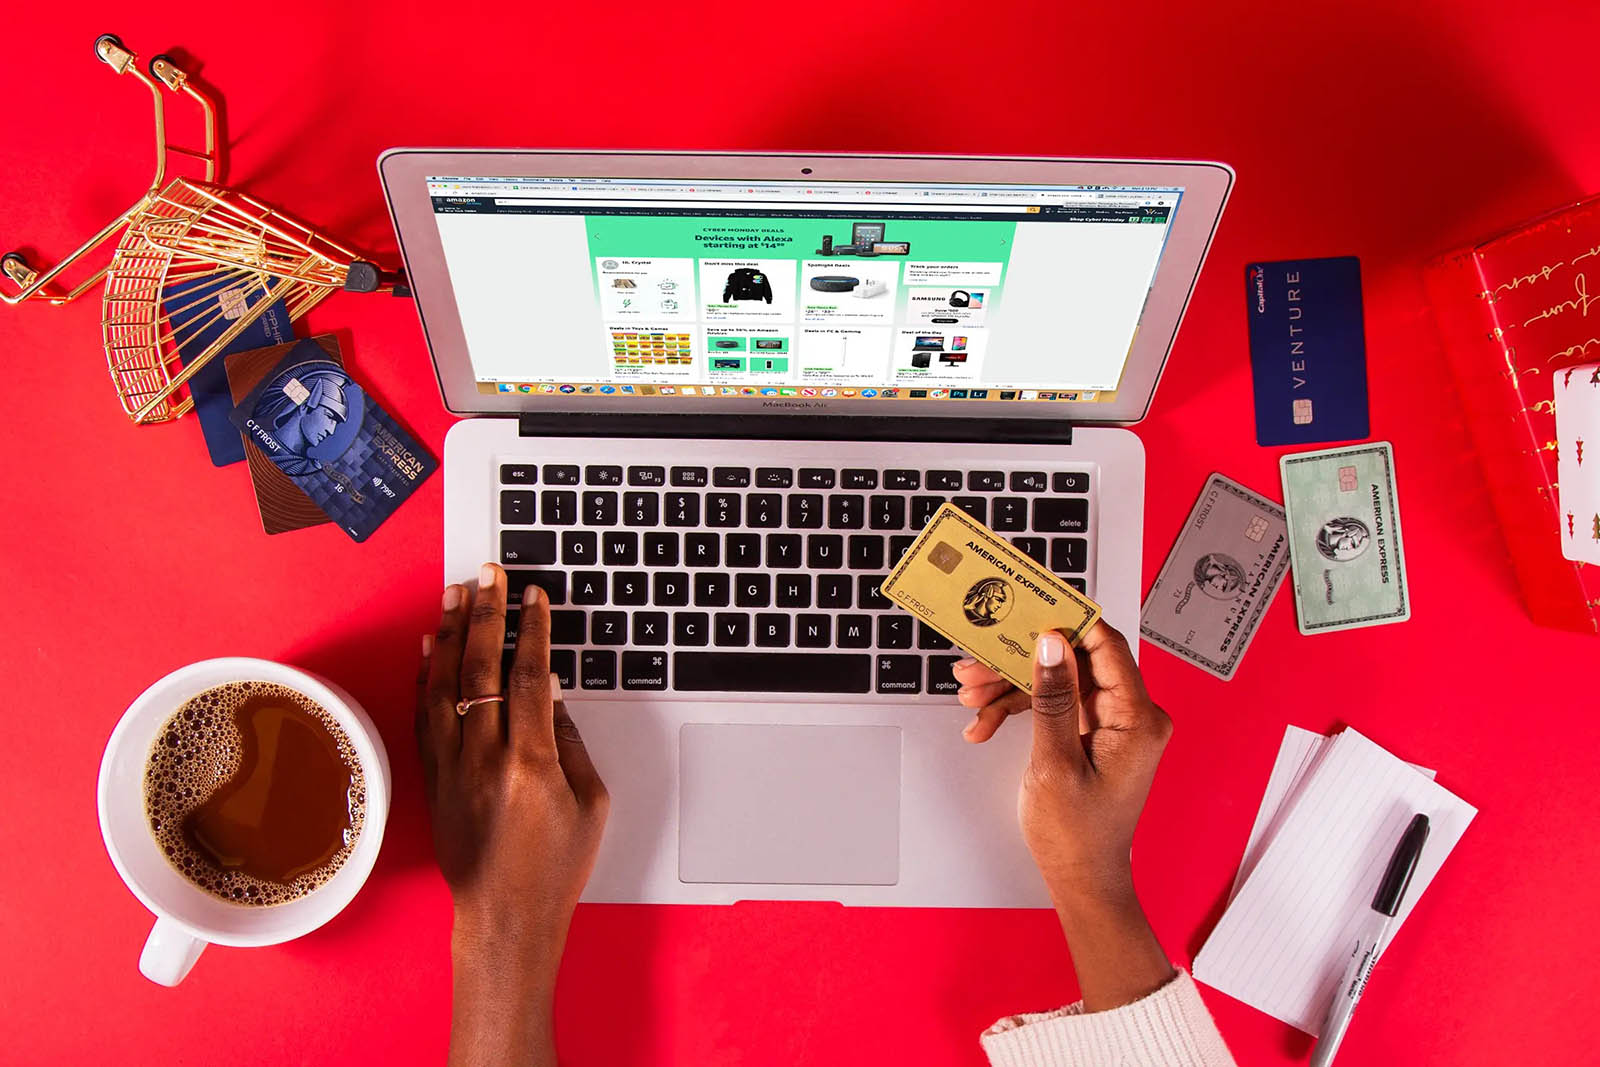 It’s Time to Find Out If You’re More Logical or Emotional With This “This or That” Game Online Shopping Credit Card